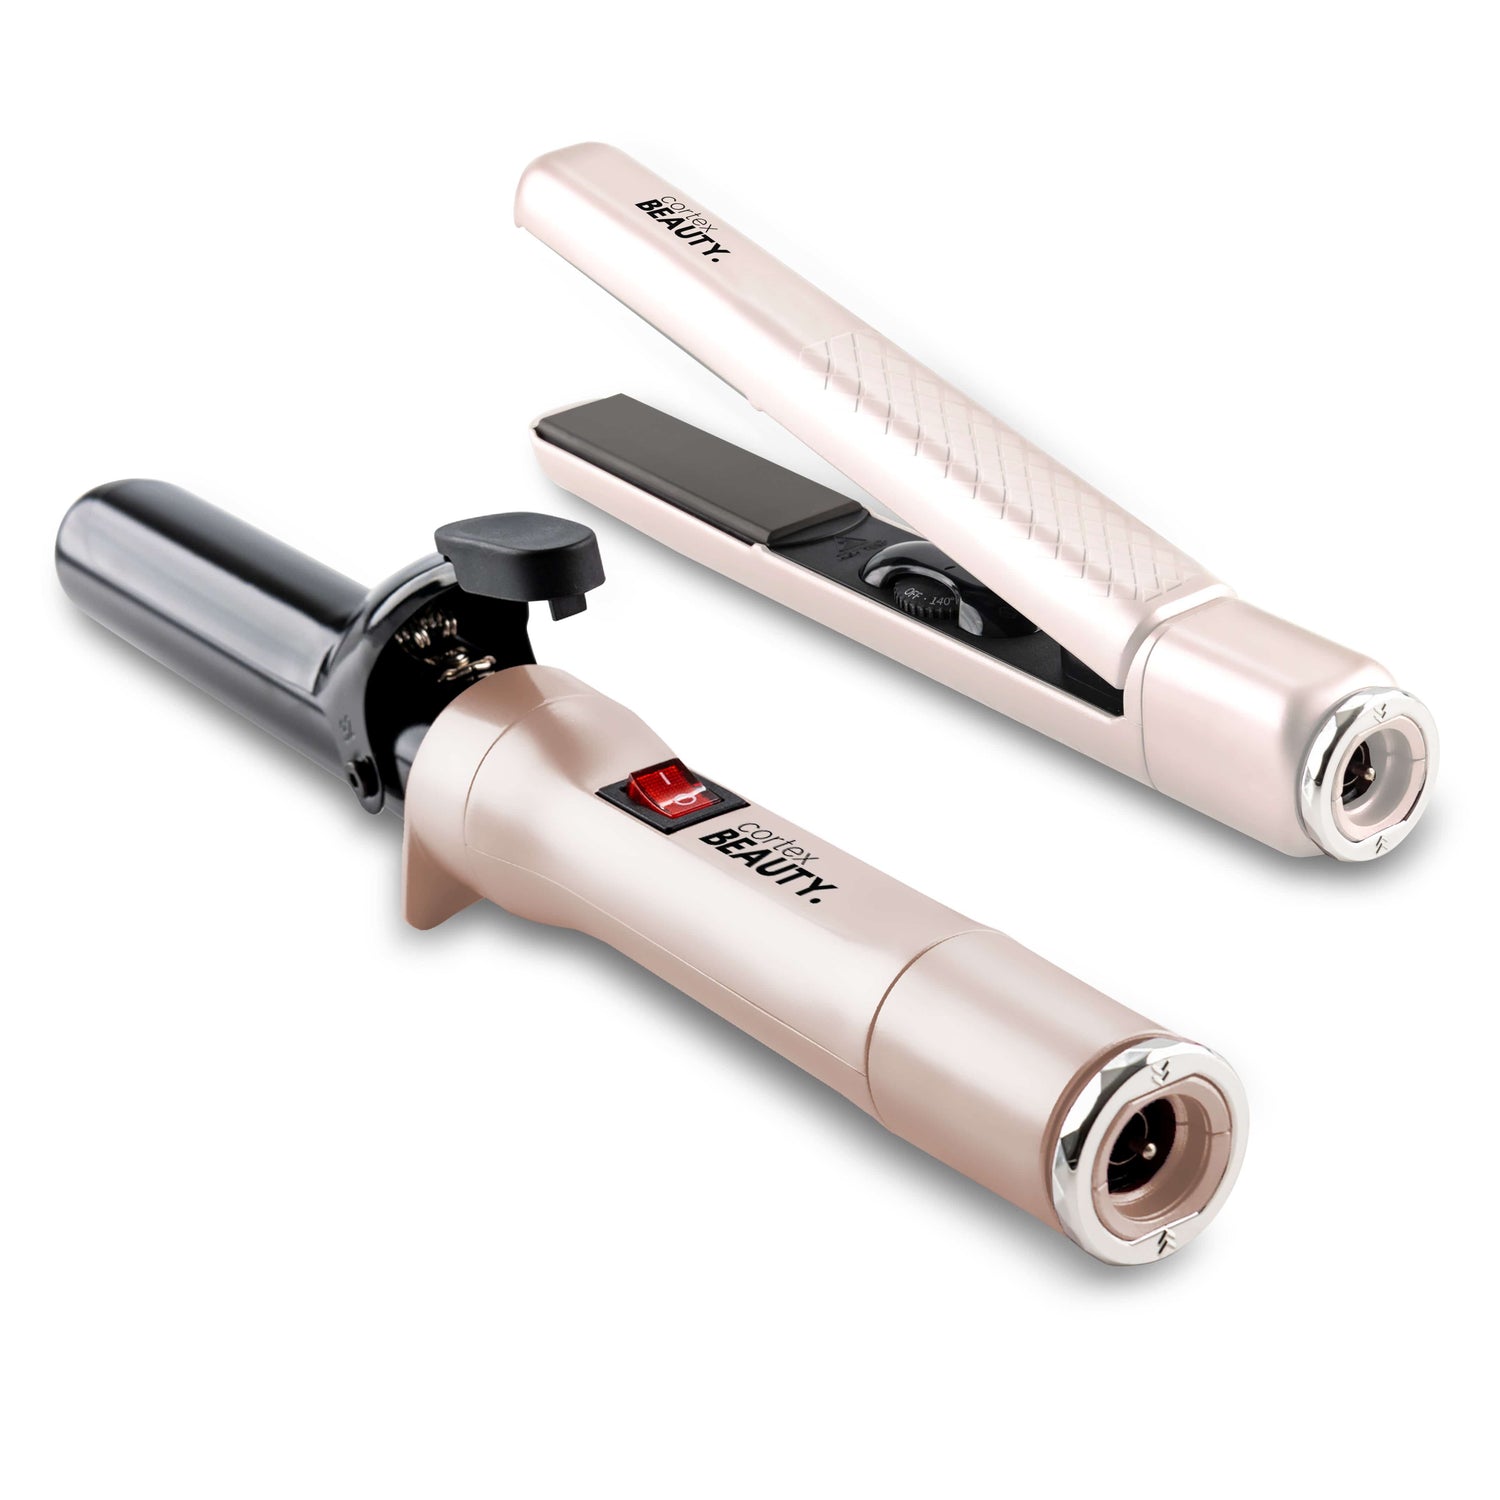 2-In-1 Smooth & Curl - Flat Iron / Curler